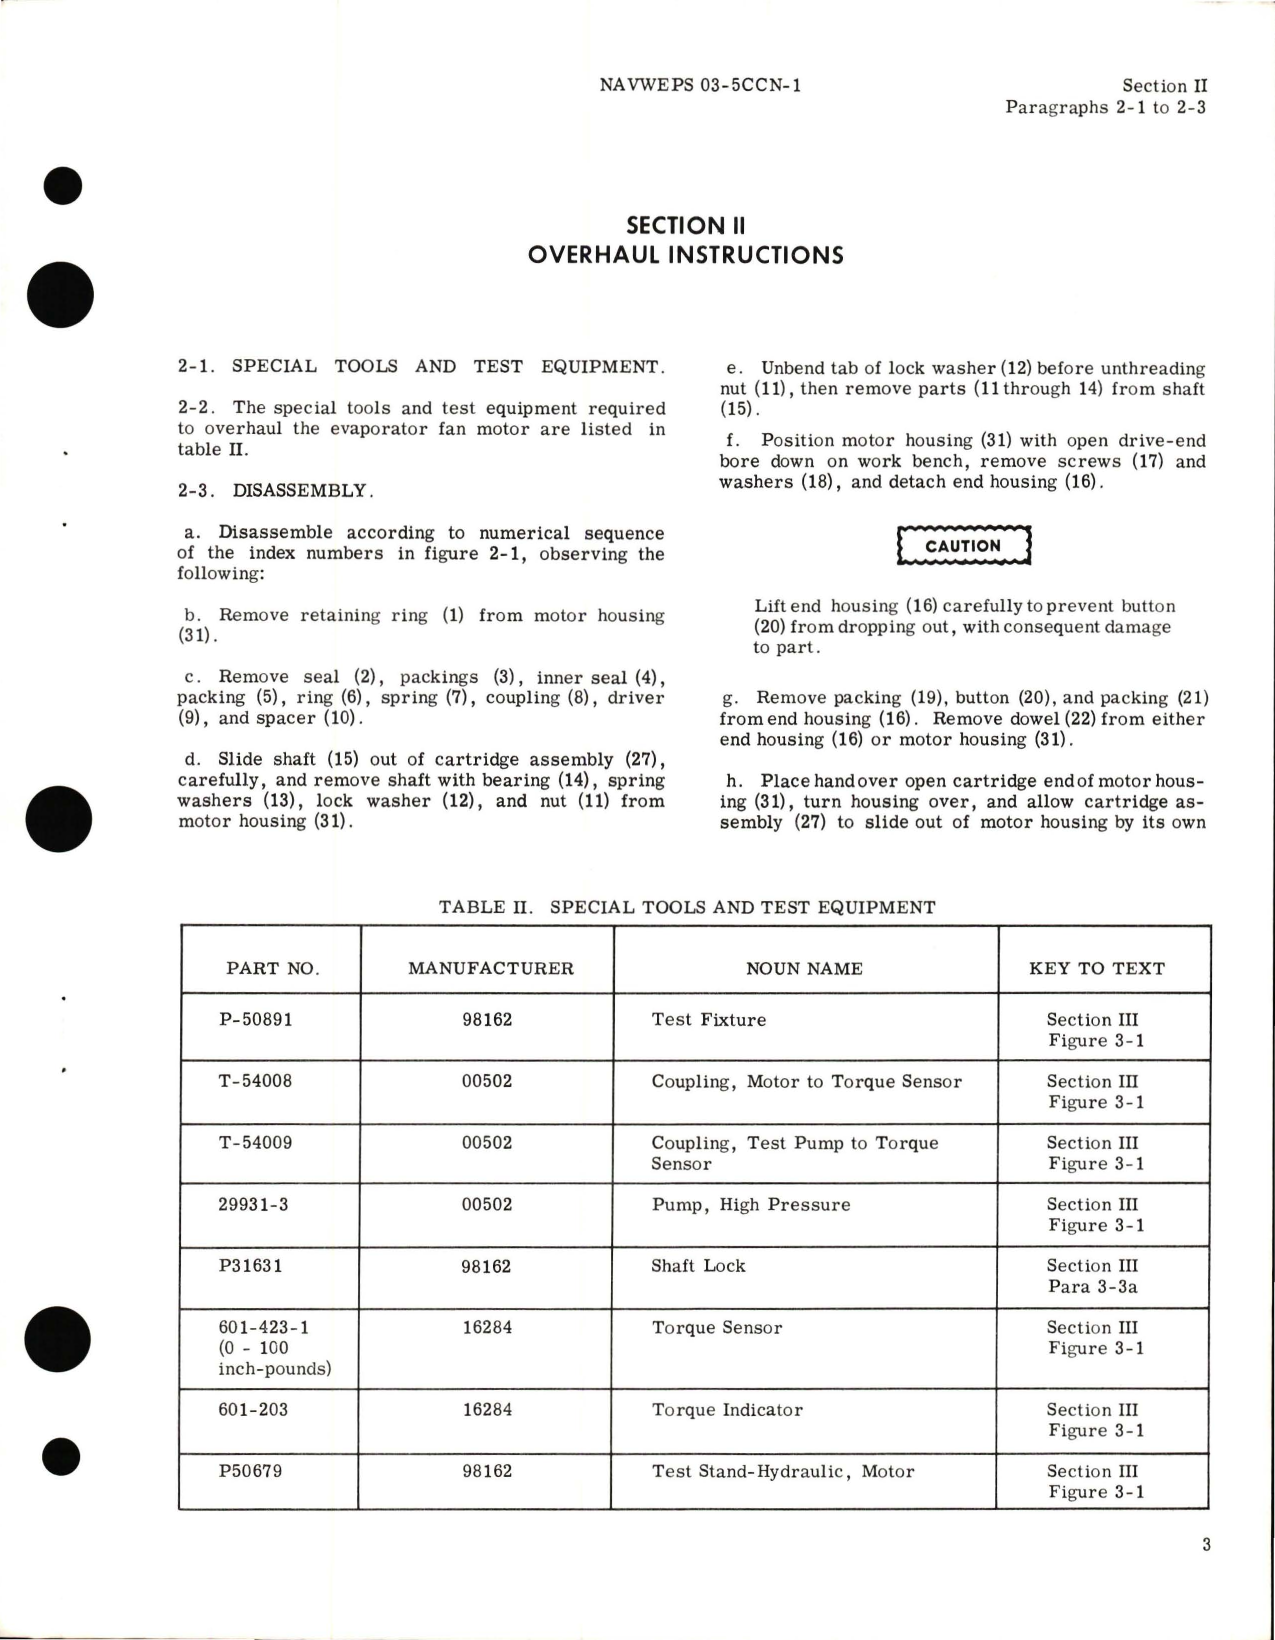 Sample page 5 from AirCorps Library document: Overhaul Instructions for  Evaporator Fan Motor - Part 70341